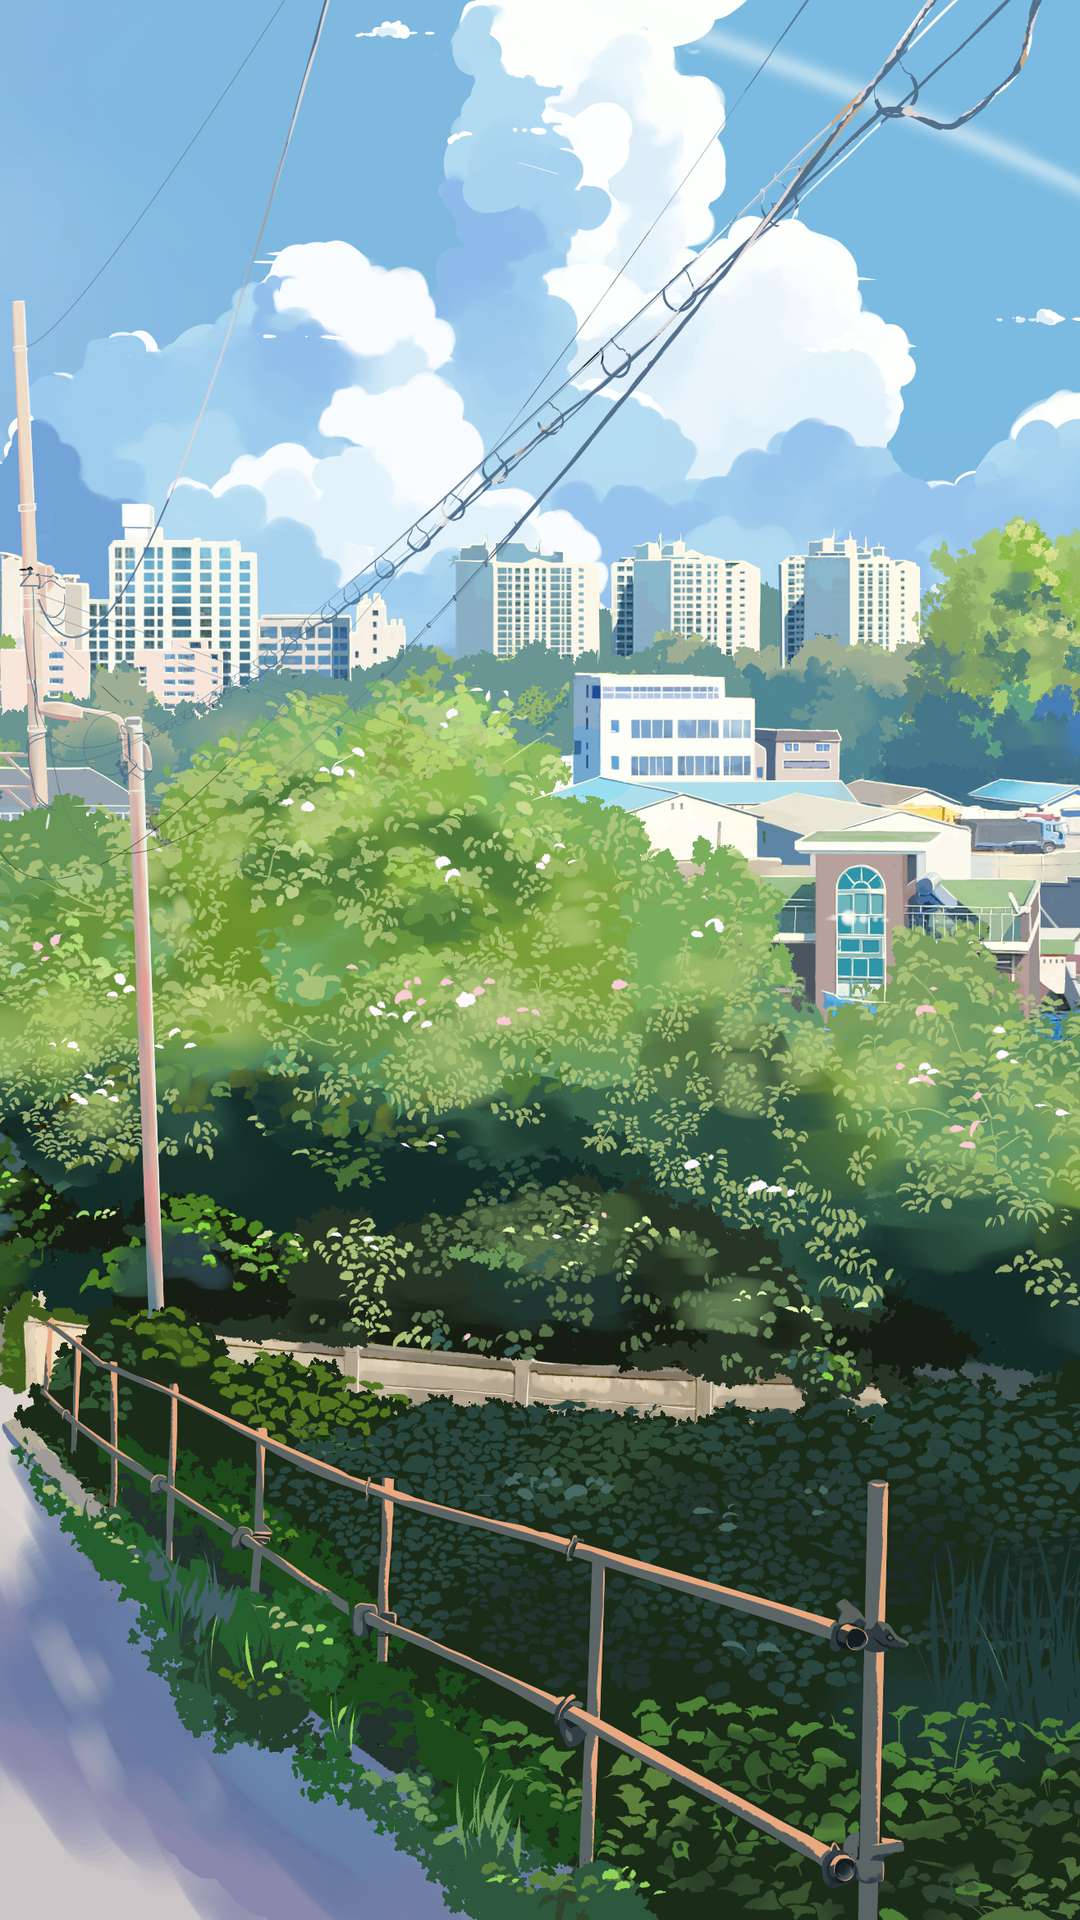 An Anime Painting Of A Town Street Background Picture Jamaica Background  Image And Wallpaper for Free Download